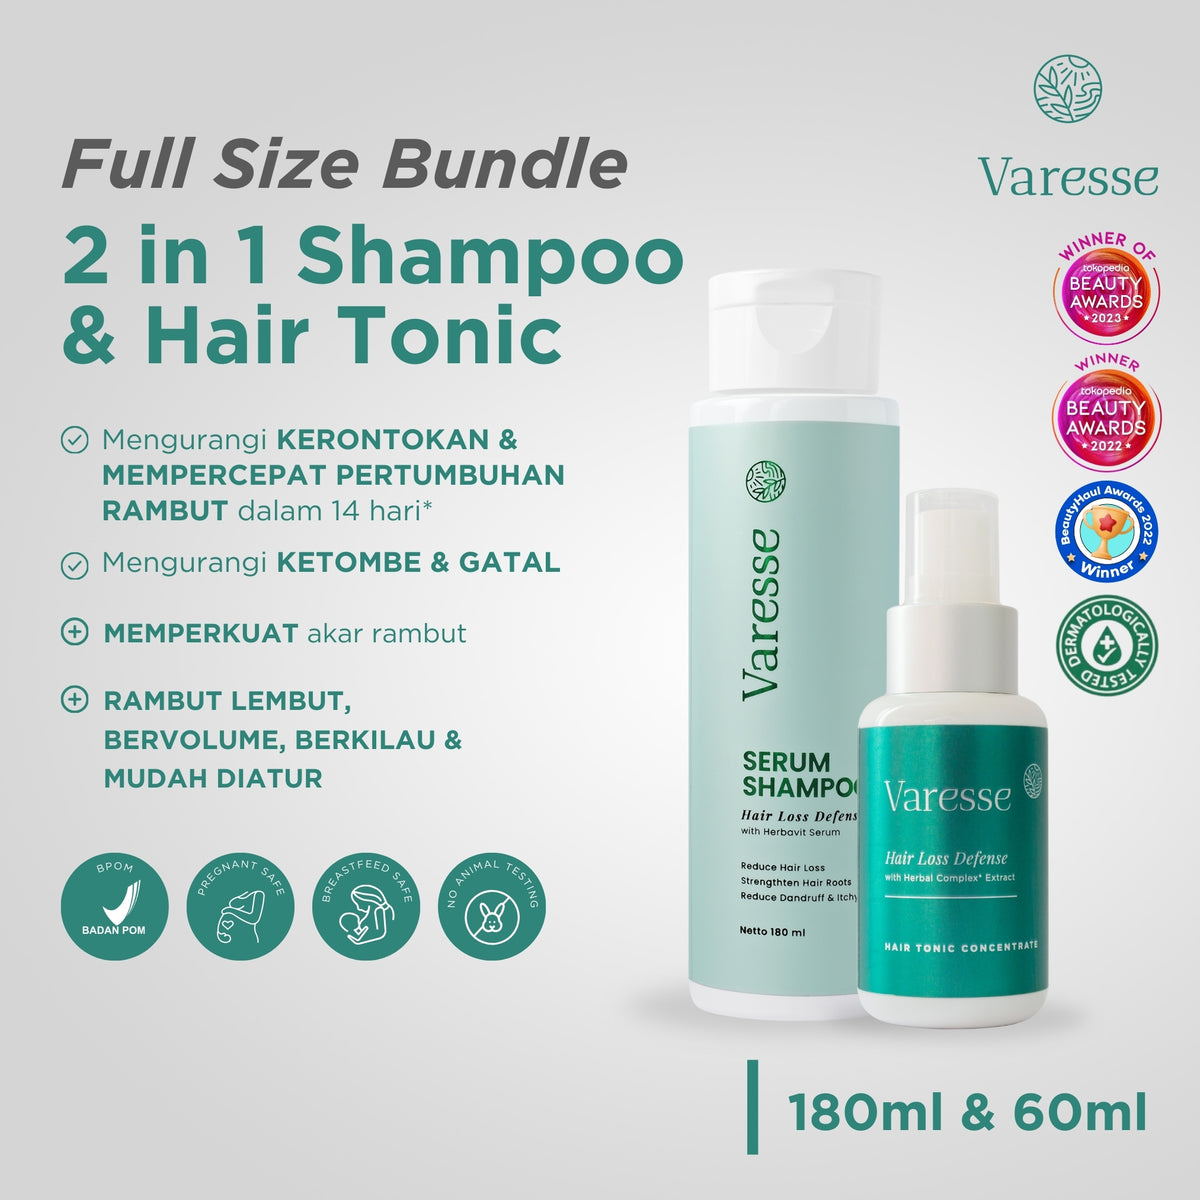 Varesse Full Size Bundle (Serum Shampoo 2 in 1 Conditioner 180ml & Hair Tonic Concentrate 60ml)